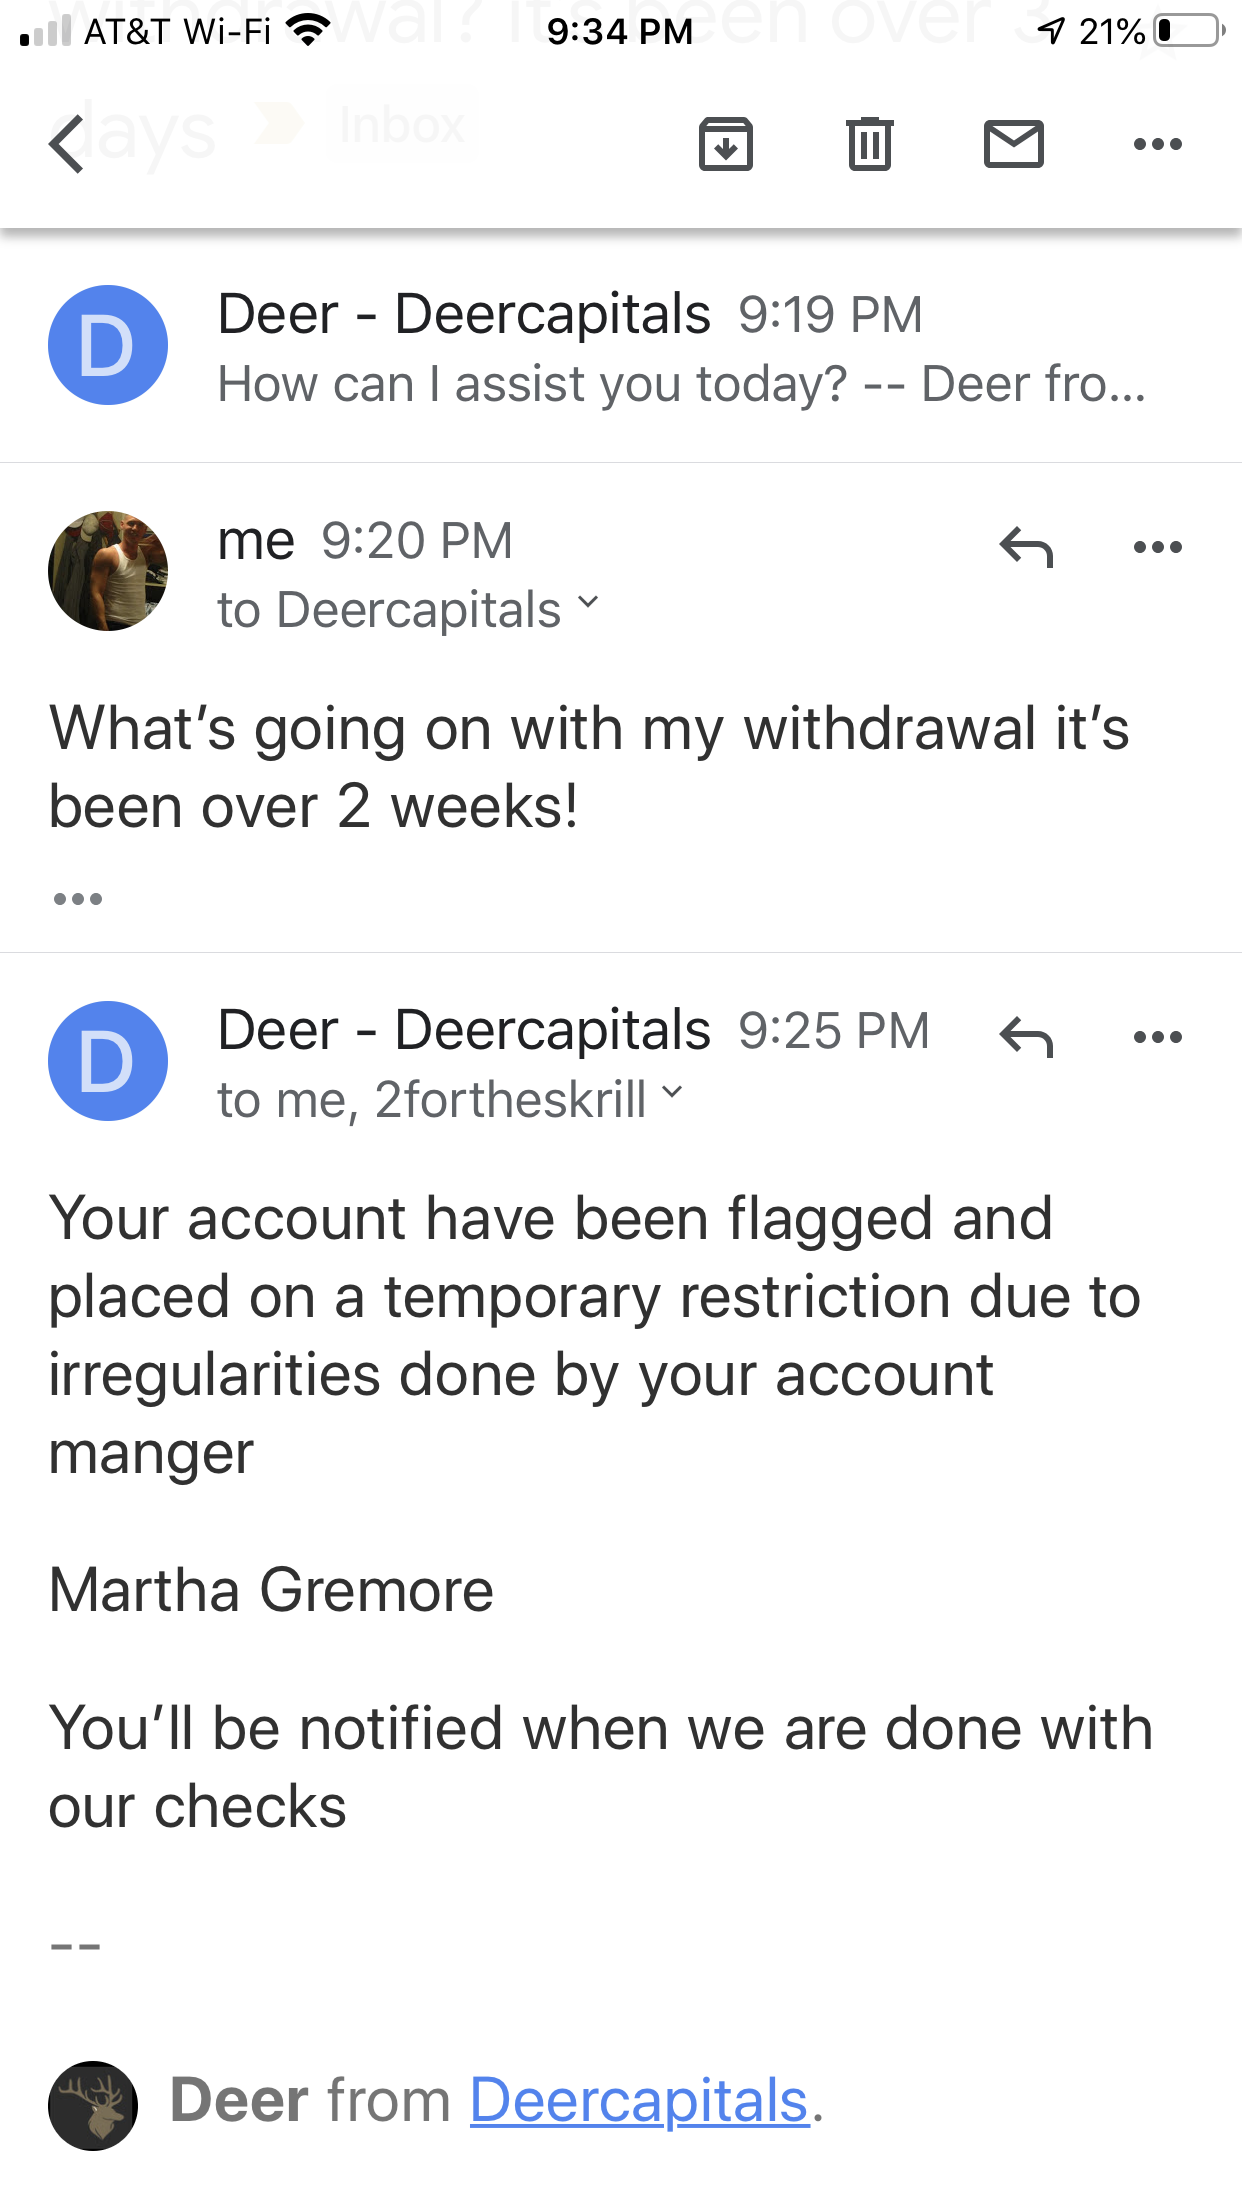 The email from Deercapitals saying Martha Gremore 